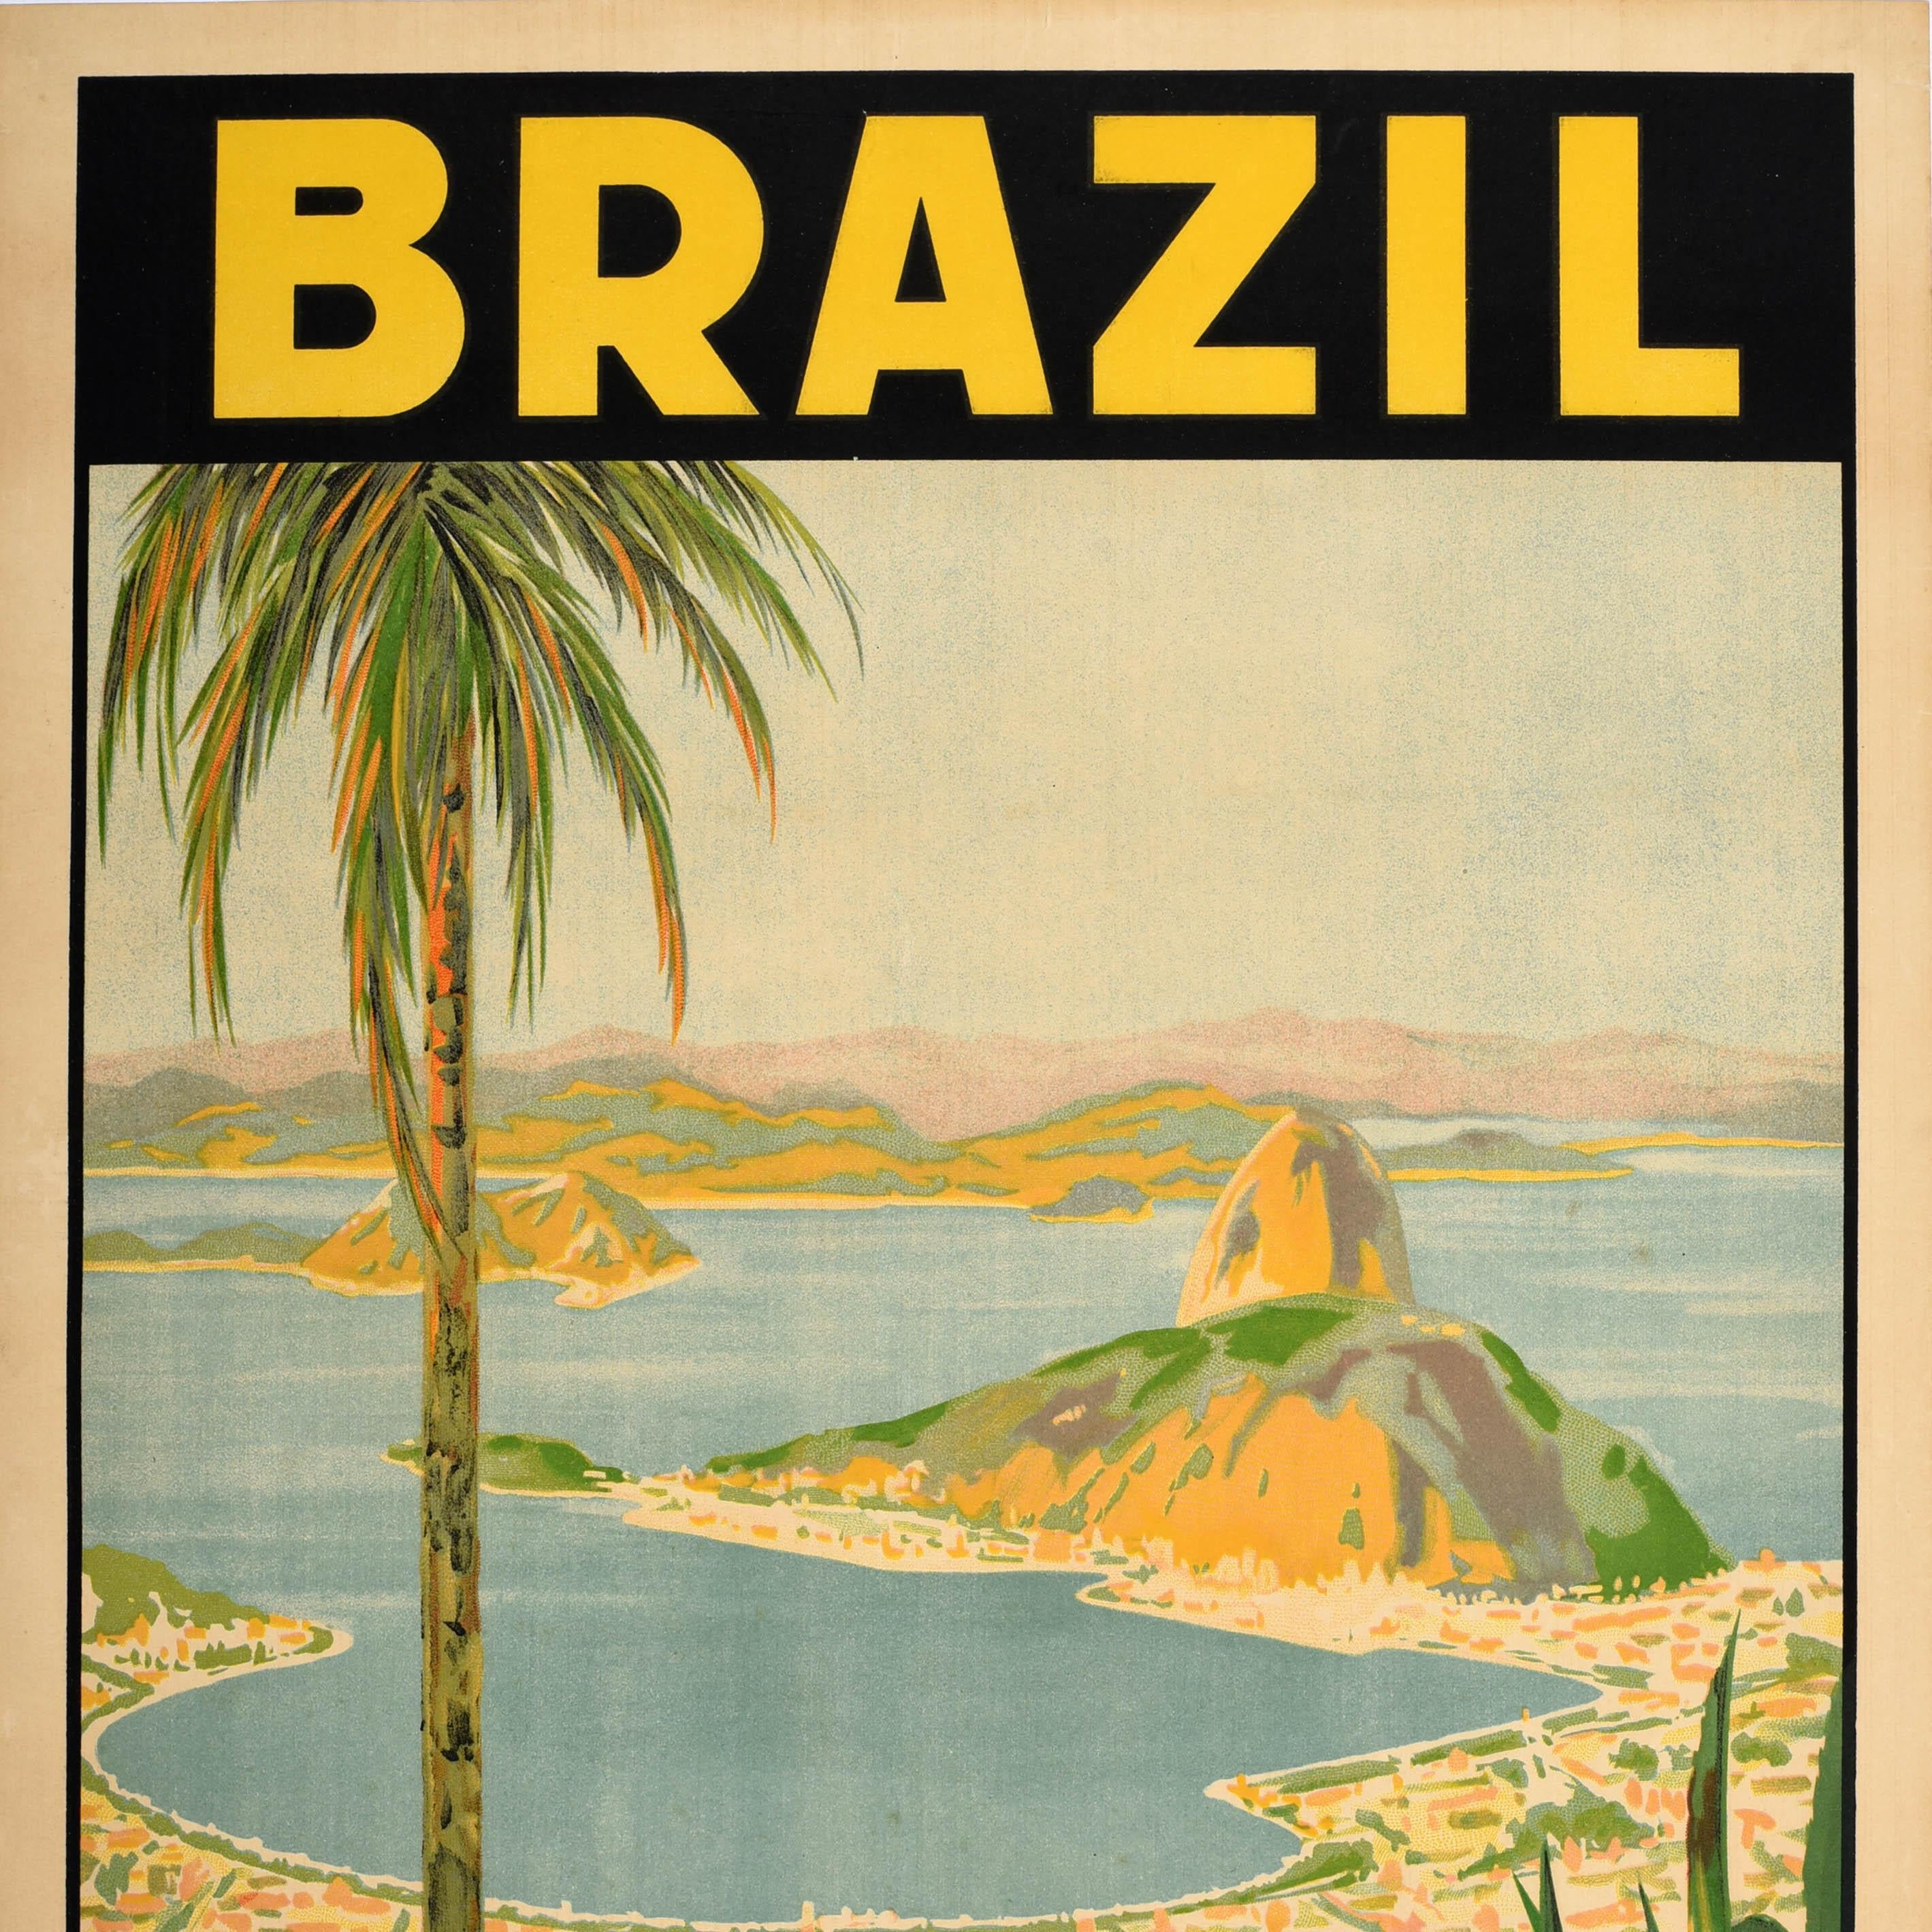 Original vintage travel poster for Brazil in South America featuring a scenic view from the Christ the Redeemer statue on Mount Corcovado towards Sugarloaf Mountain in Guanabara Bay Rio de Janeiro with trees in the foreground and hills on the